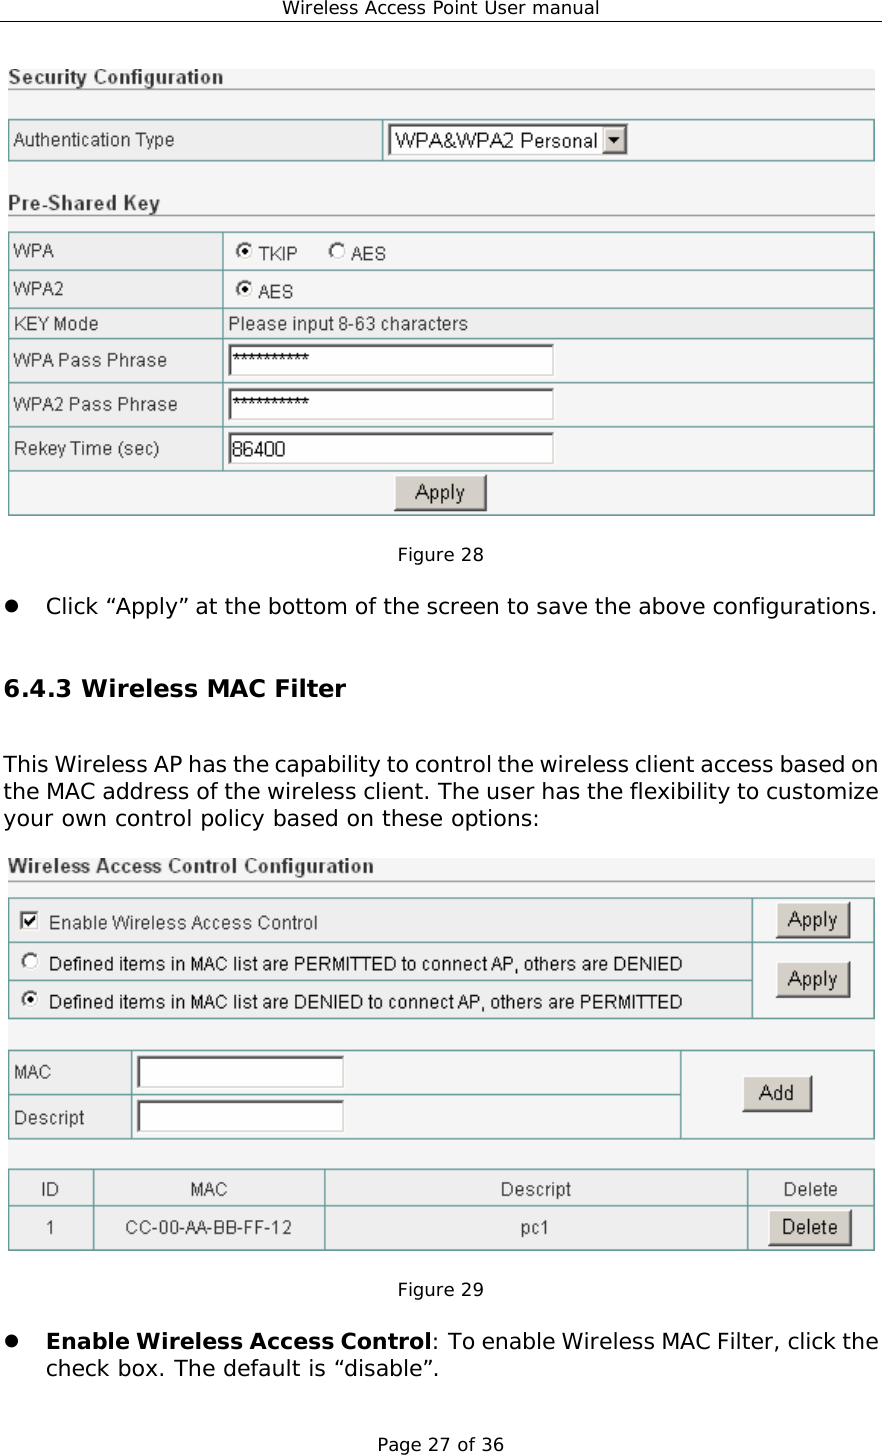 Wireless Access Point User manual Page 27 of 36   Figure 28  z Click “Apply” at the bottom of the screen to save the above configurations.  6.4.3 Wireless MAC Filter This Wireless AP has the capability to control the wireless client access based on the MAC address of the wireless client. The user has the flexibility to customize your own control policy based on these options:    Figure 29  z Enable Wireless Access Control: To enable Wireless MAC Filter, click the check box. The default is “disable”. 